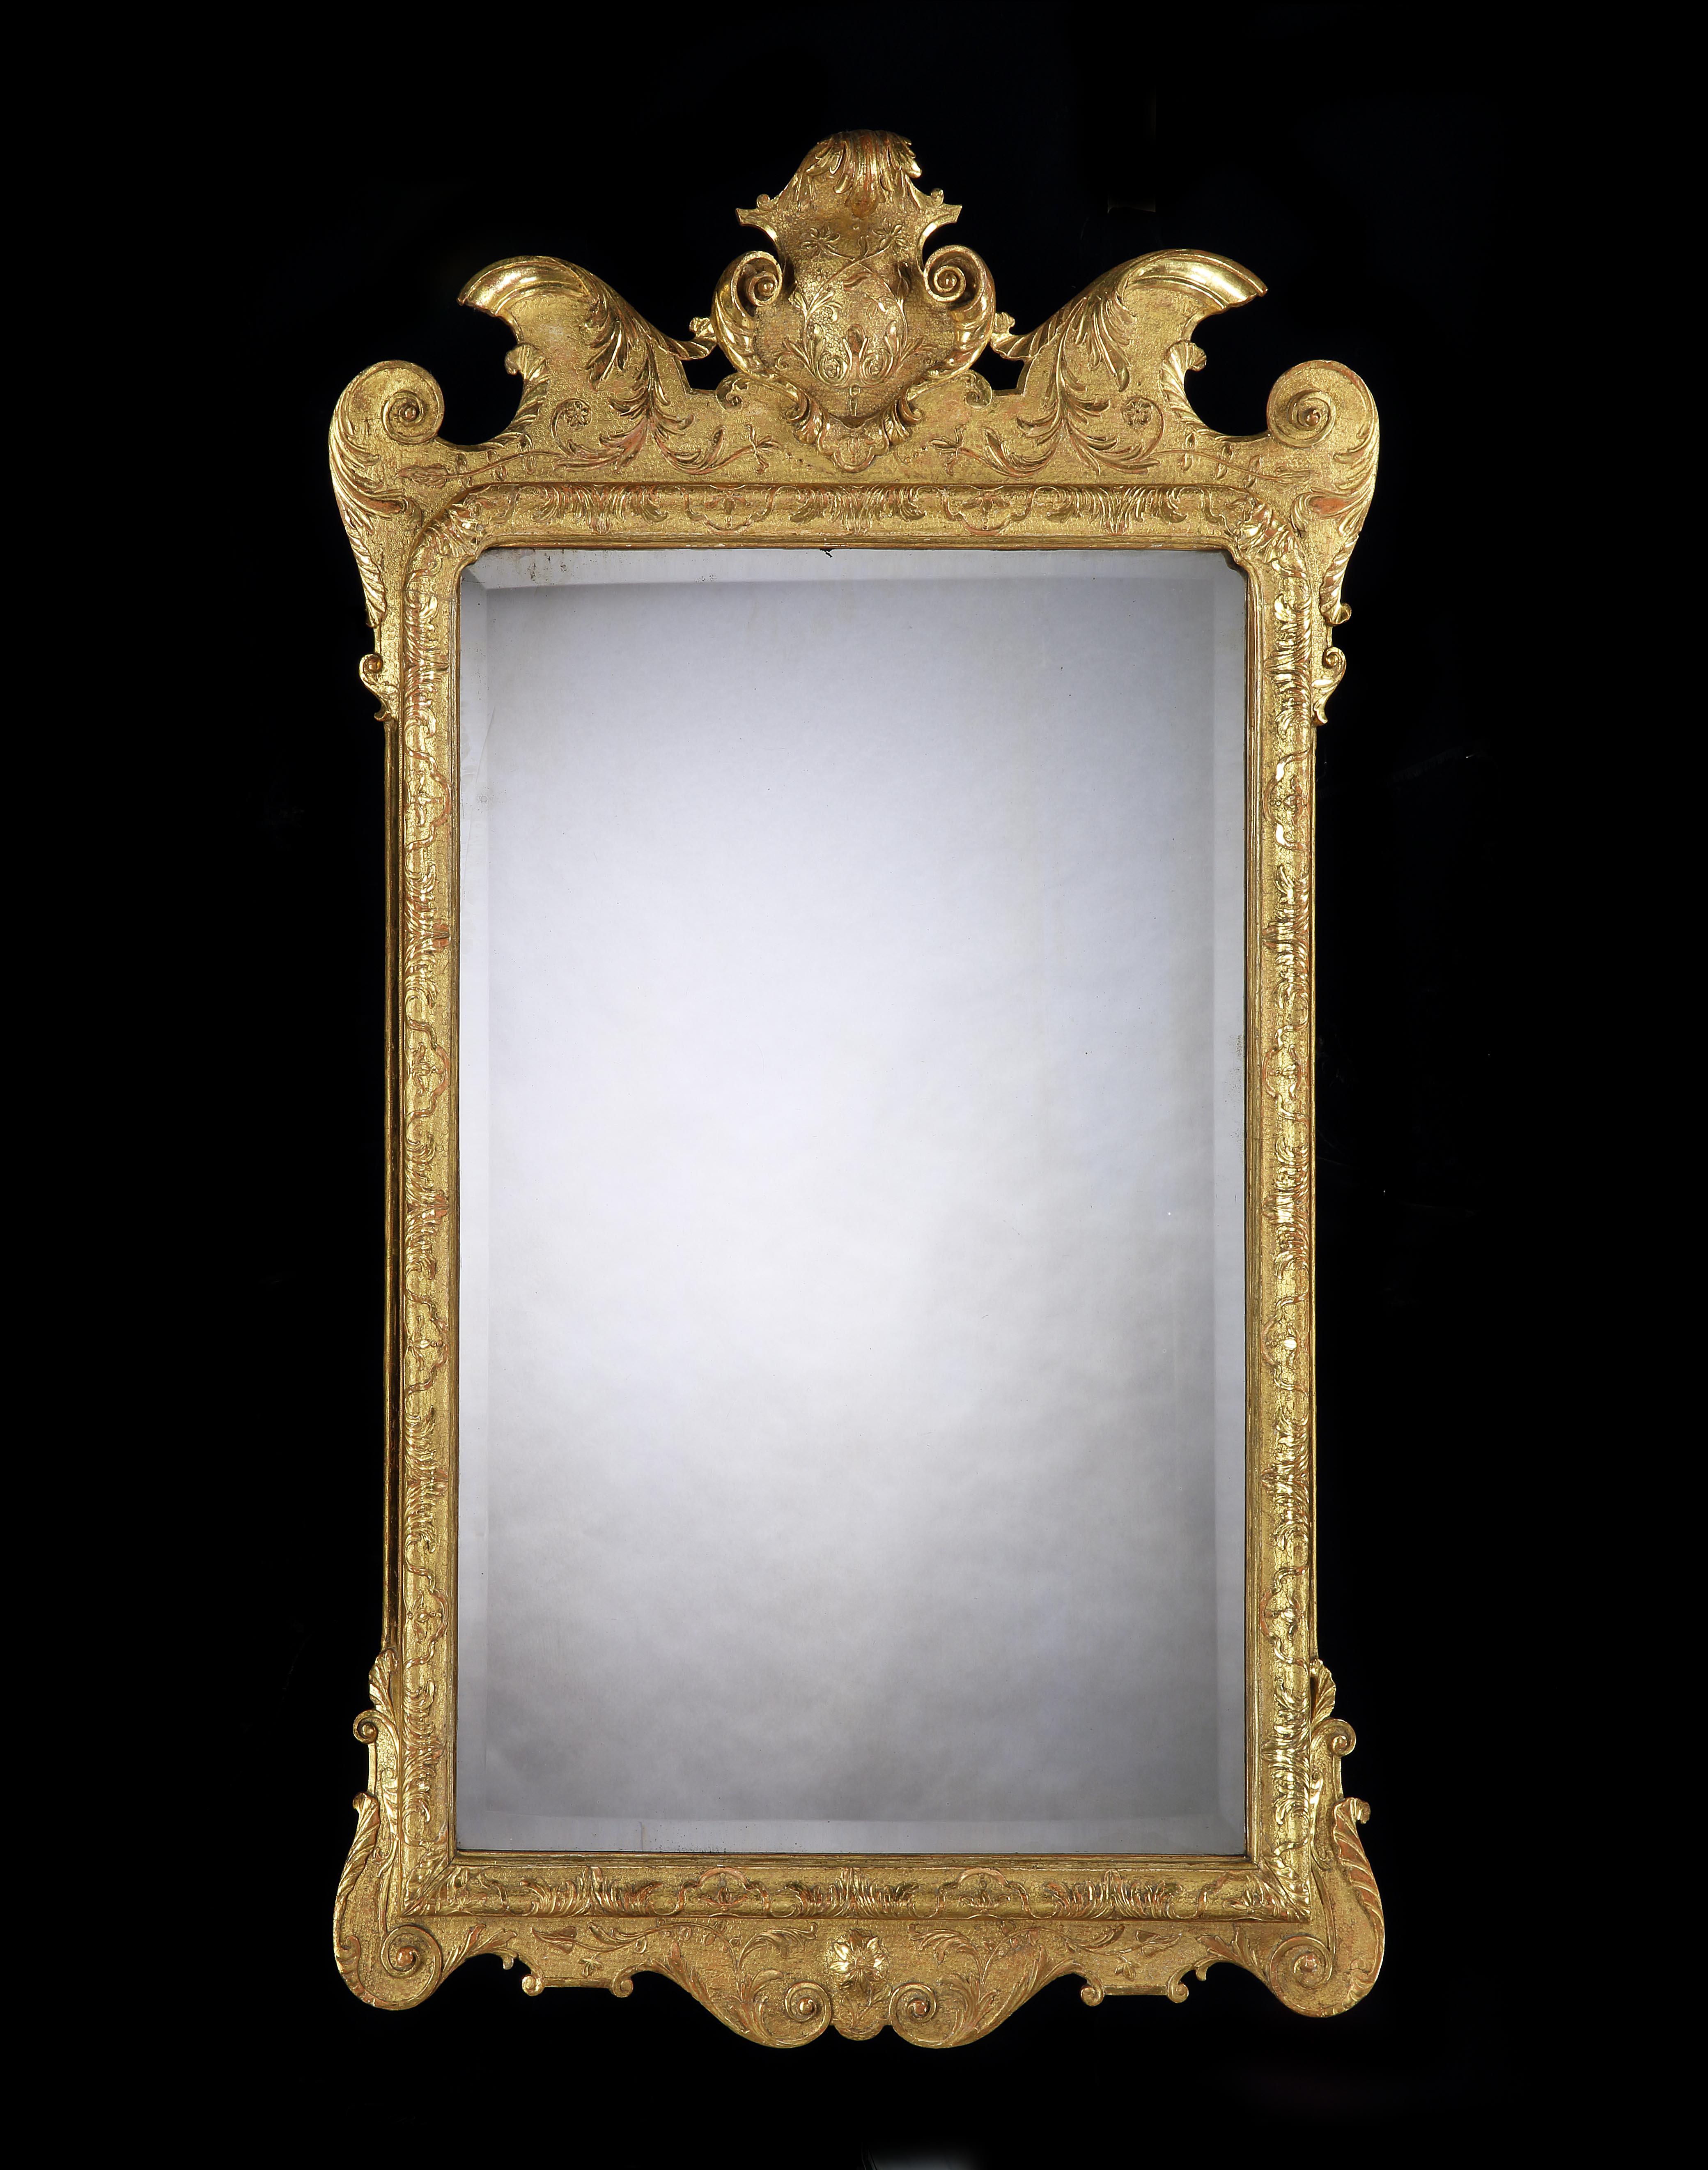 A George I carved and gilded gesso mirror with a stippled background and detailed carved foliage, the shaped cornice with a central cartouche, with bold scrolls to the sides. The 18th century bevelled plate surrounded by a frame similarly carved.